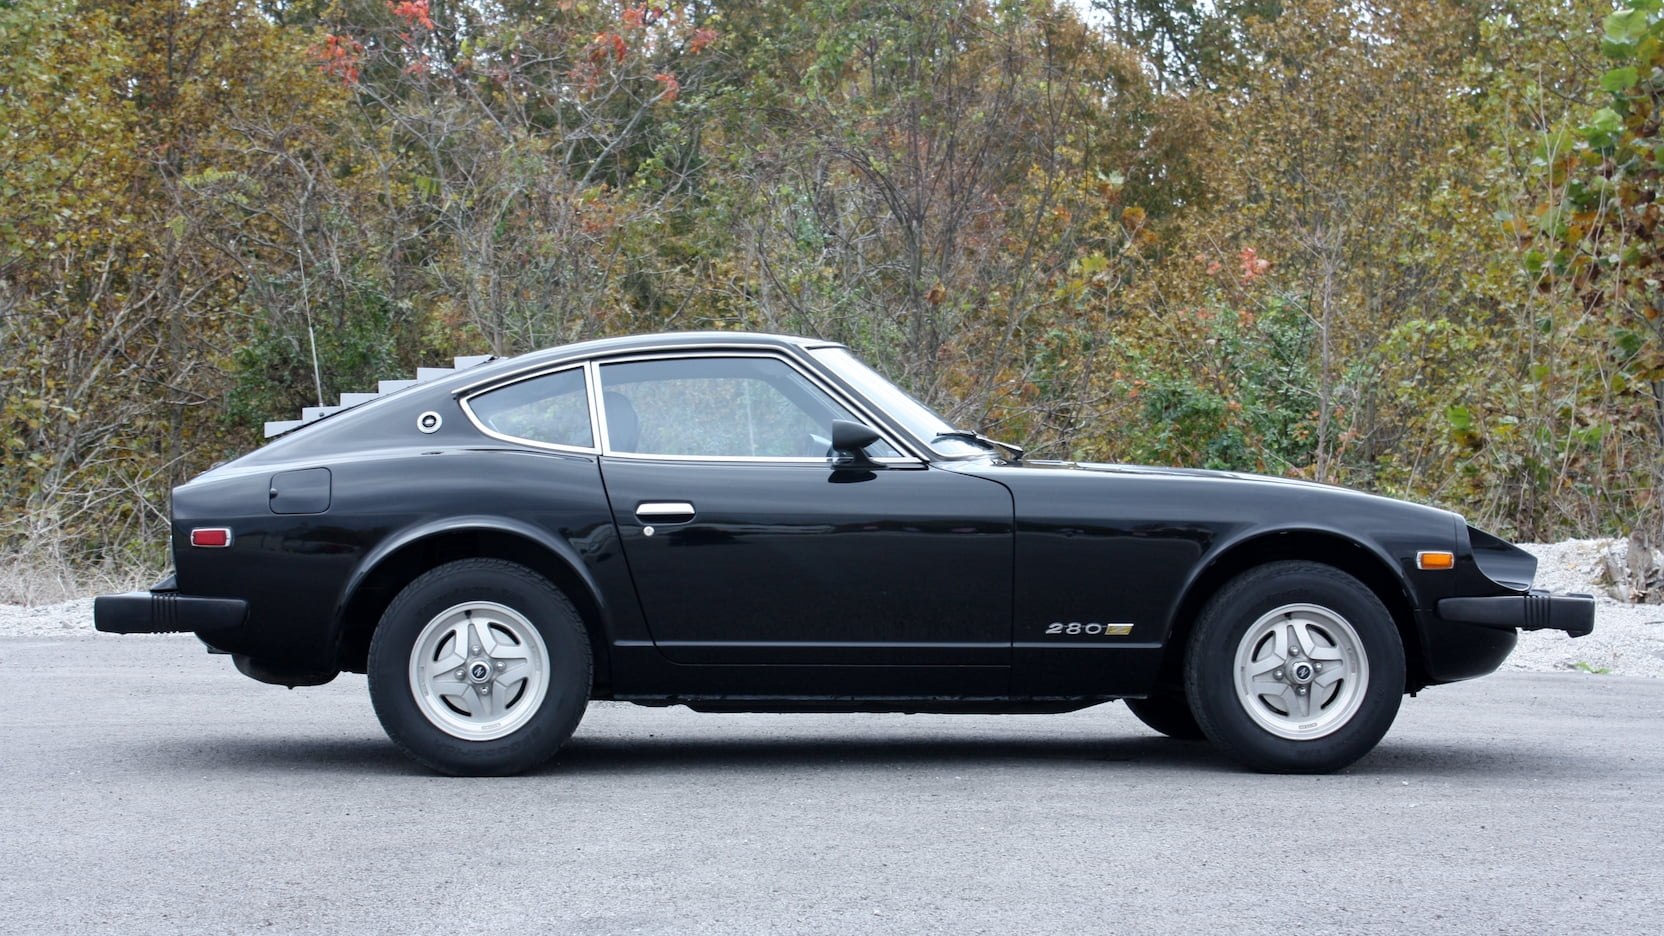 Affordable Classic Cars In Titusville 1978 Datsun 280Z